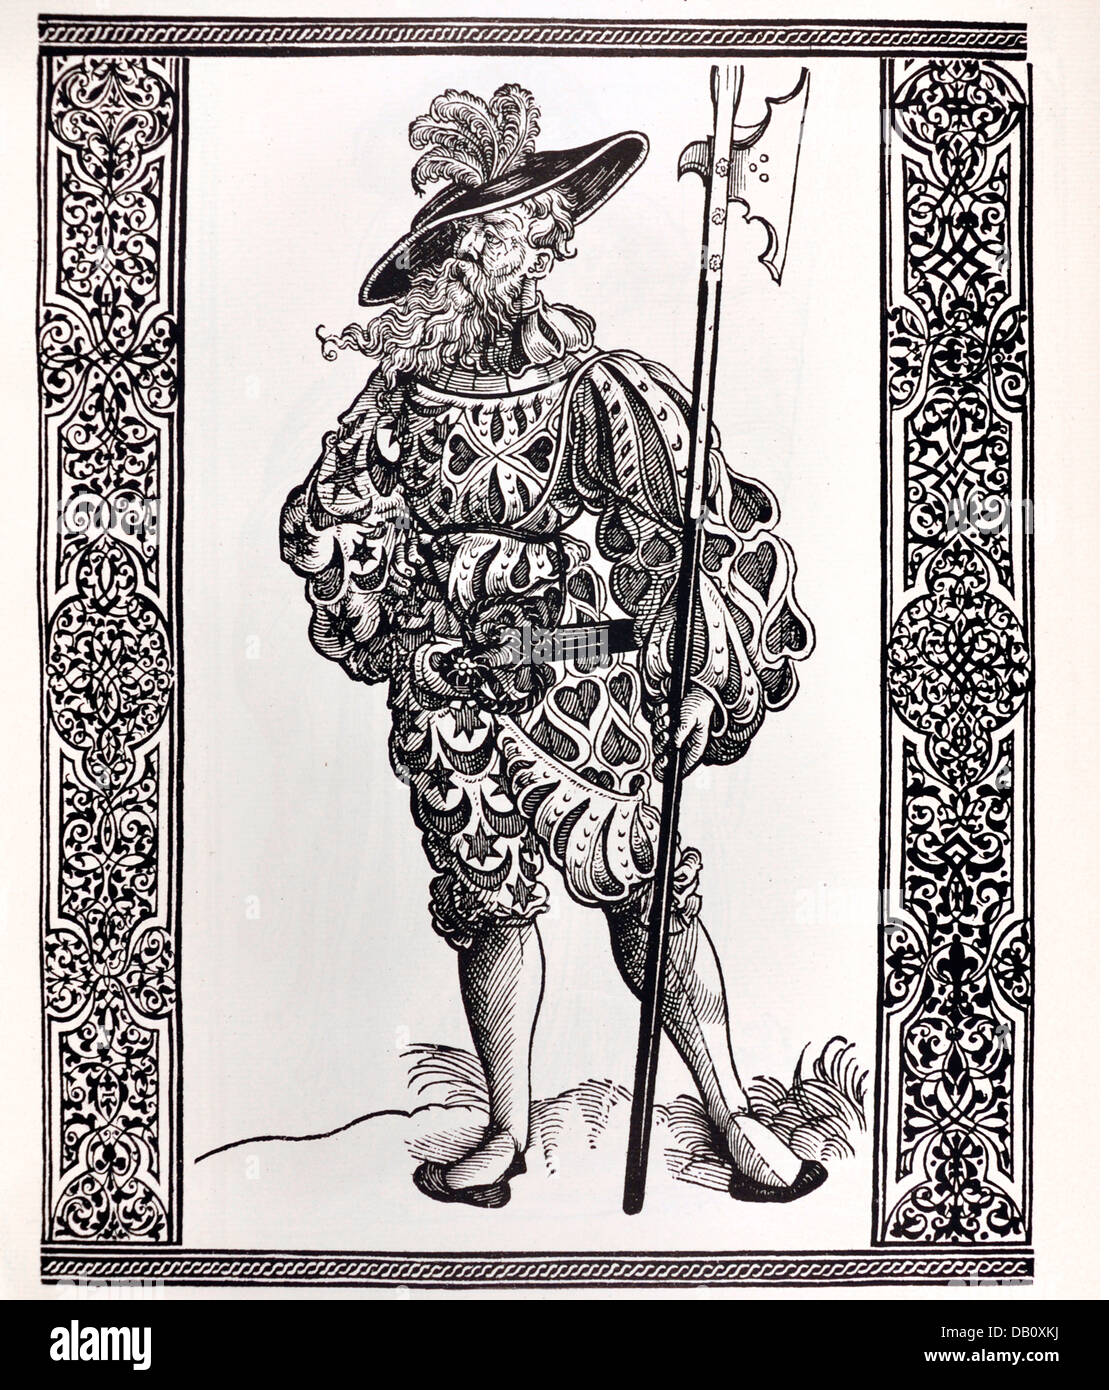 military, lansquenets, commissary of stores, 'Bastl Machenstreit' (Sebastian Troublemaker), full length, standing, woodcut, by David de Necker, circa 1540, from: Warriors of his Roman Imperial Majesty at the age of the lansquenets, edited by August Johann Count Breuner von Enkevoirt, Vienna 1883, Additional-Rights-Clearences-Not Available Stock Photo